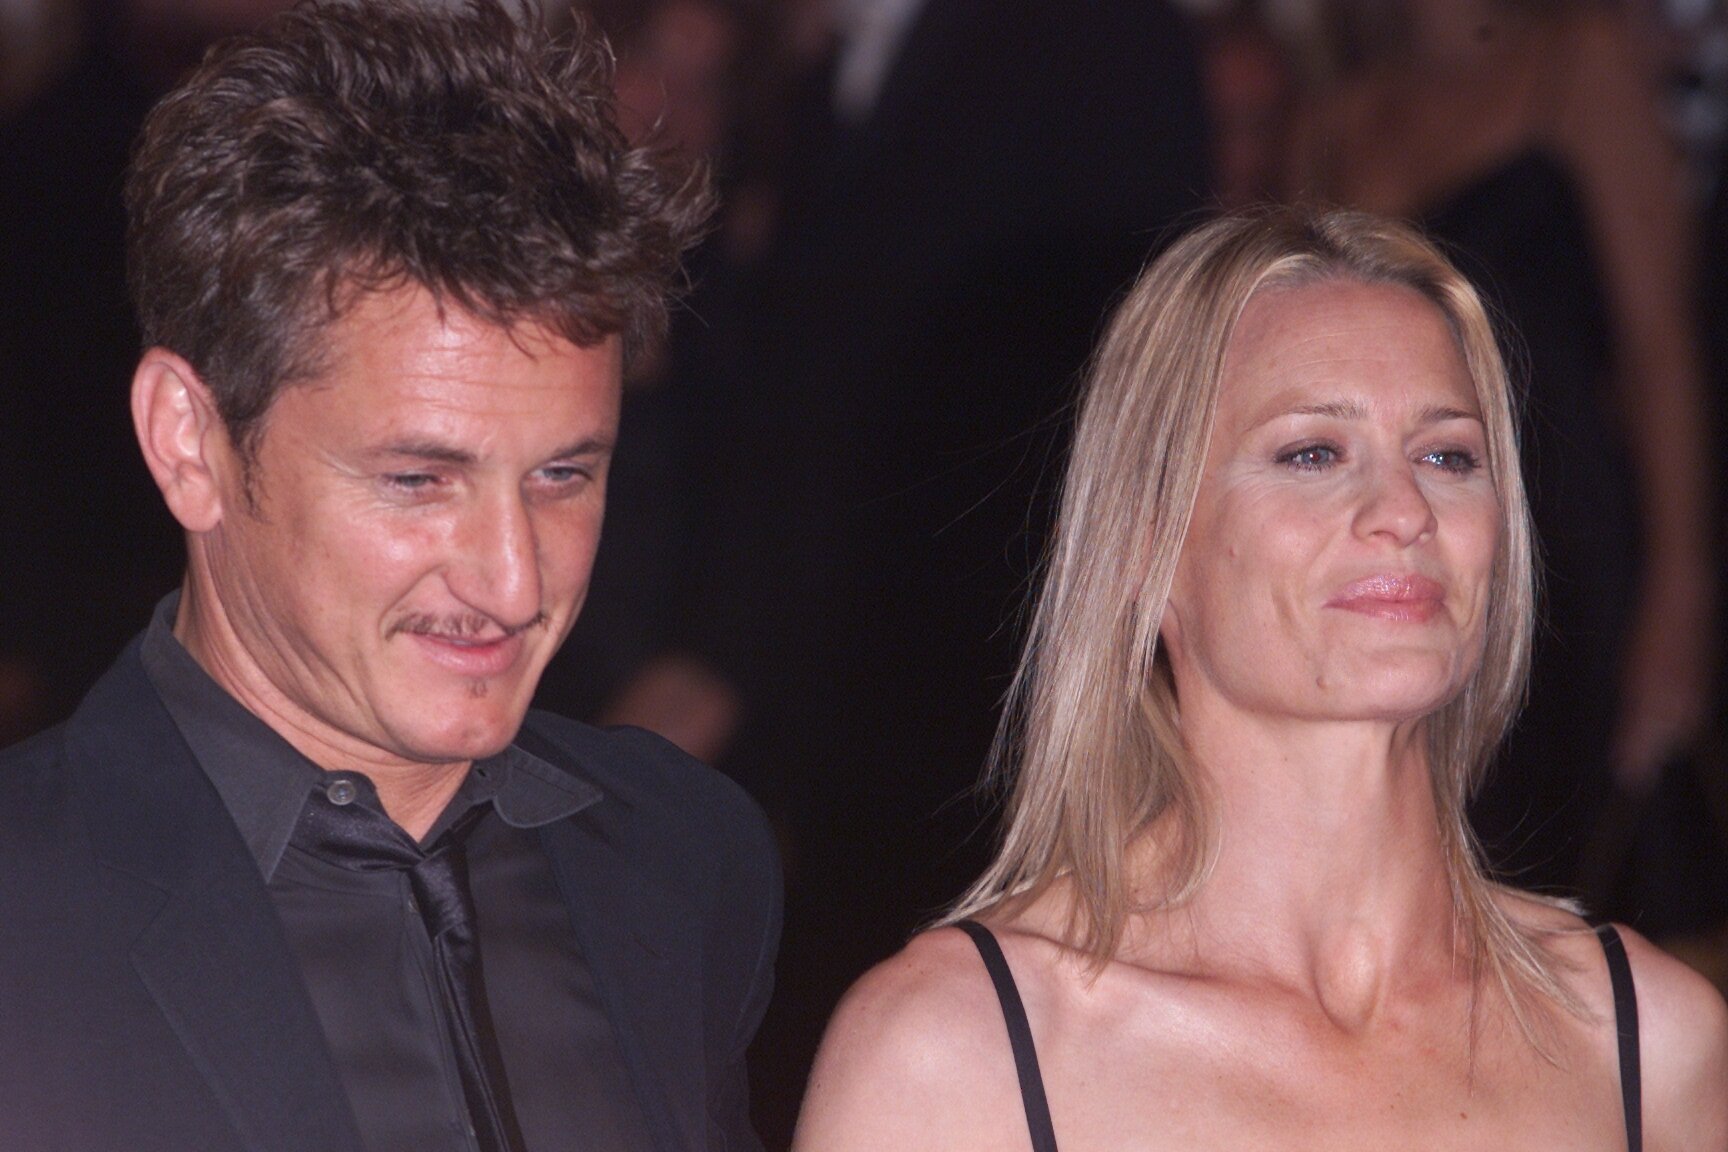 Sean Penn and Robin Wright attend "The Pledge" film premiere in Cannes, France in 2001. | Photo: Getty Images